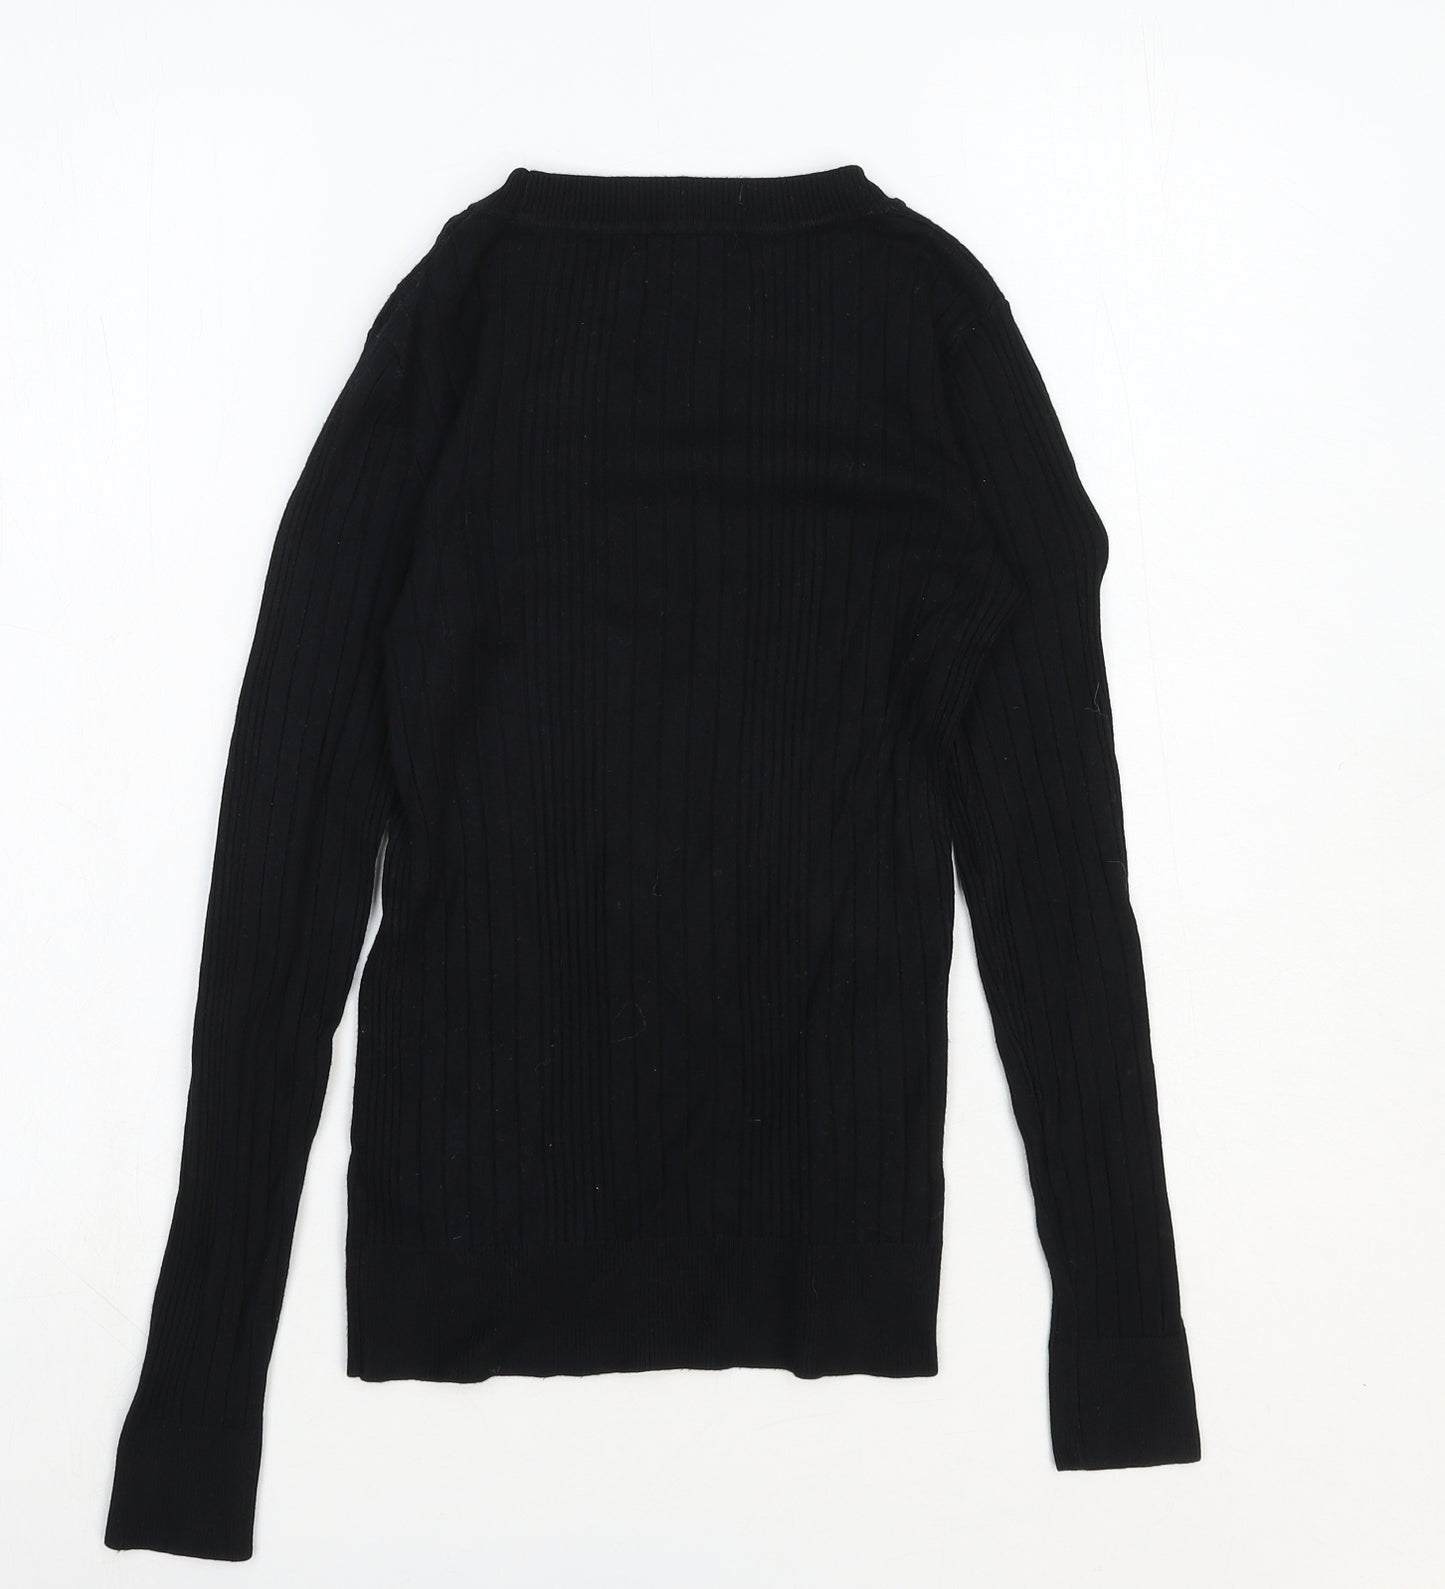 New Look Womens Black Crew Neck Cotton Pullover Jumper Size 8 Pullover